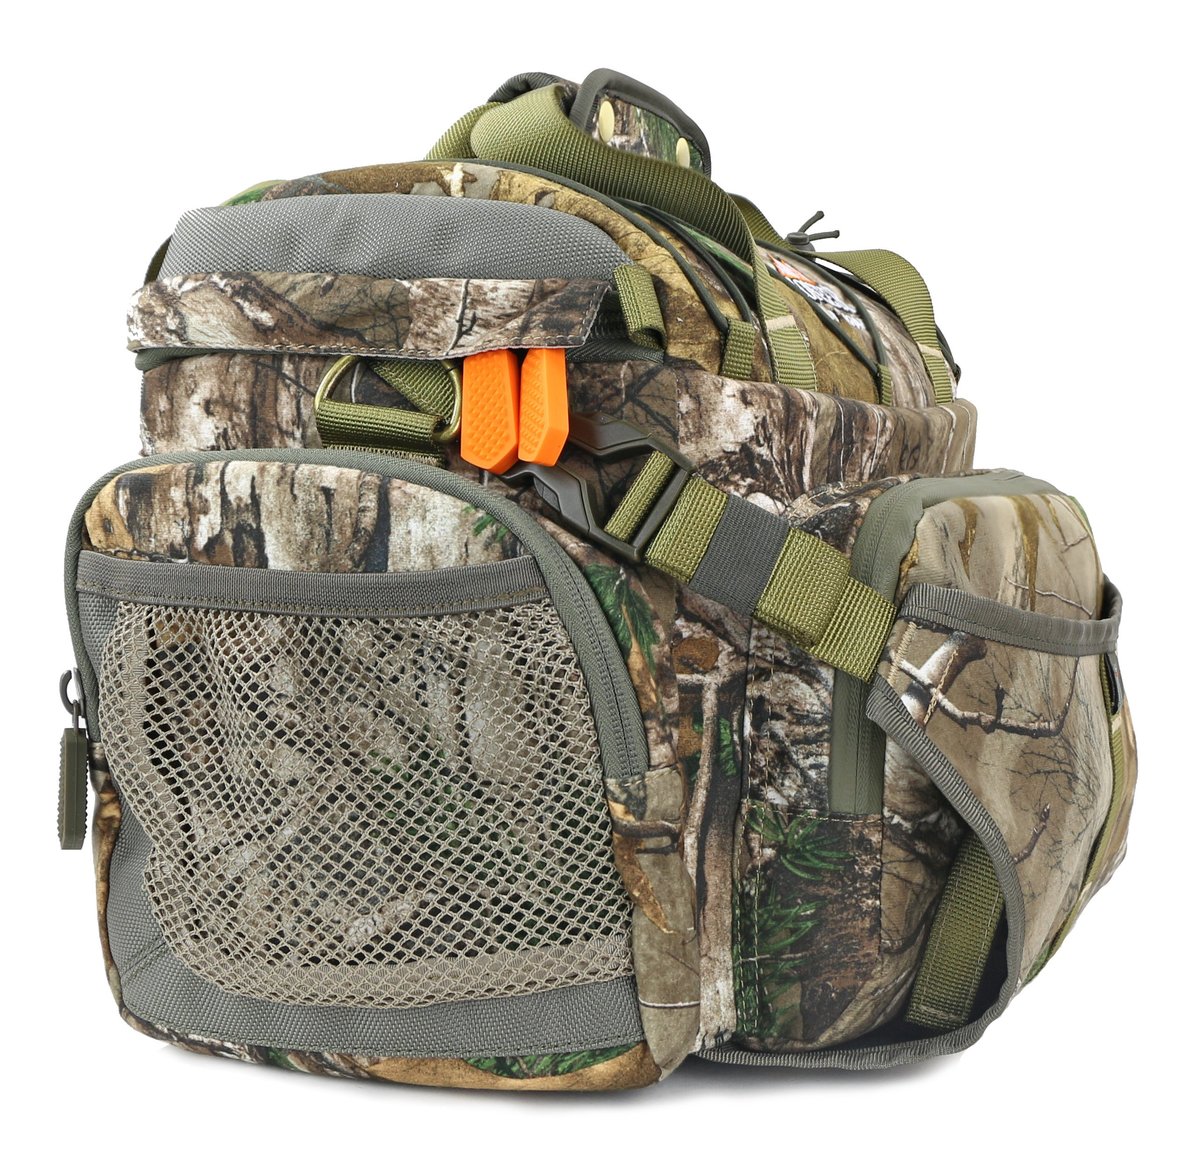 STEAL OF THE WEEK (while supplies last)- PIONEER 900RT Hunting/Range Bag with Lifetime Warranty - Realtree